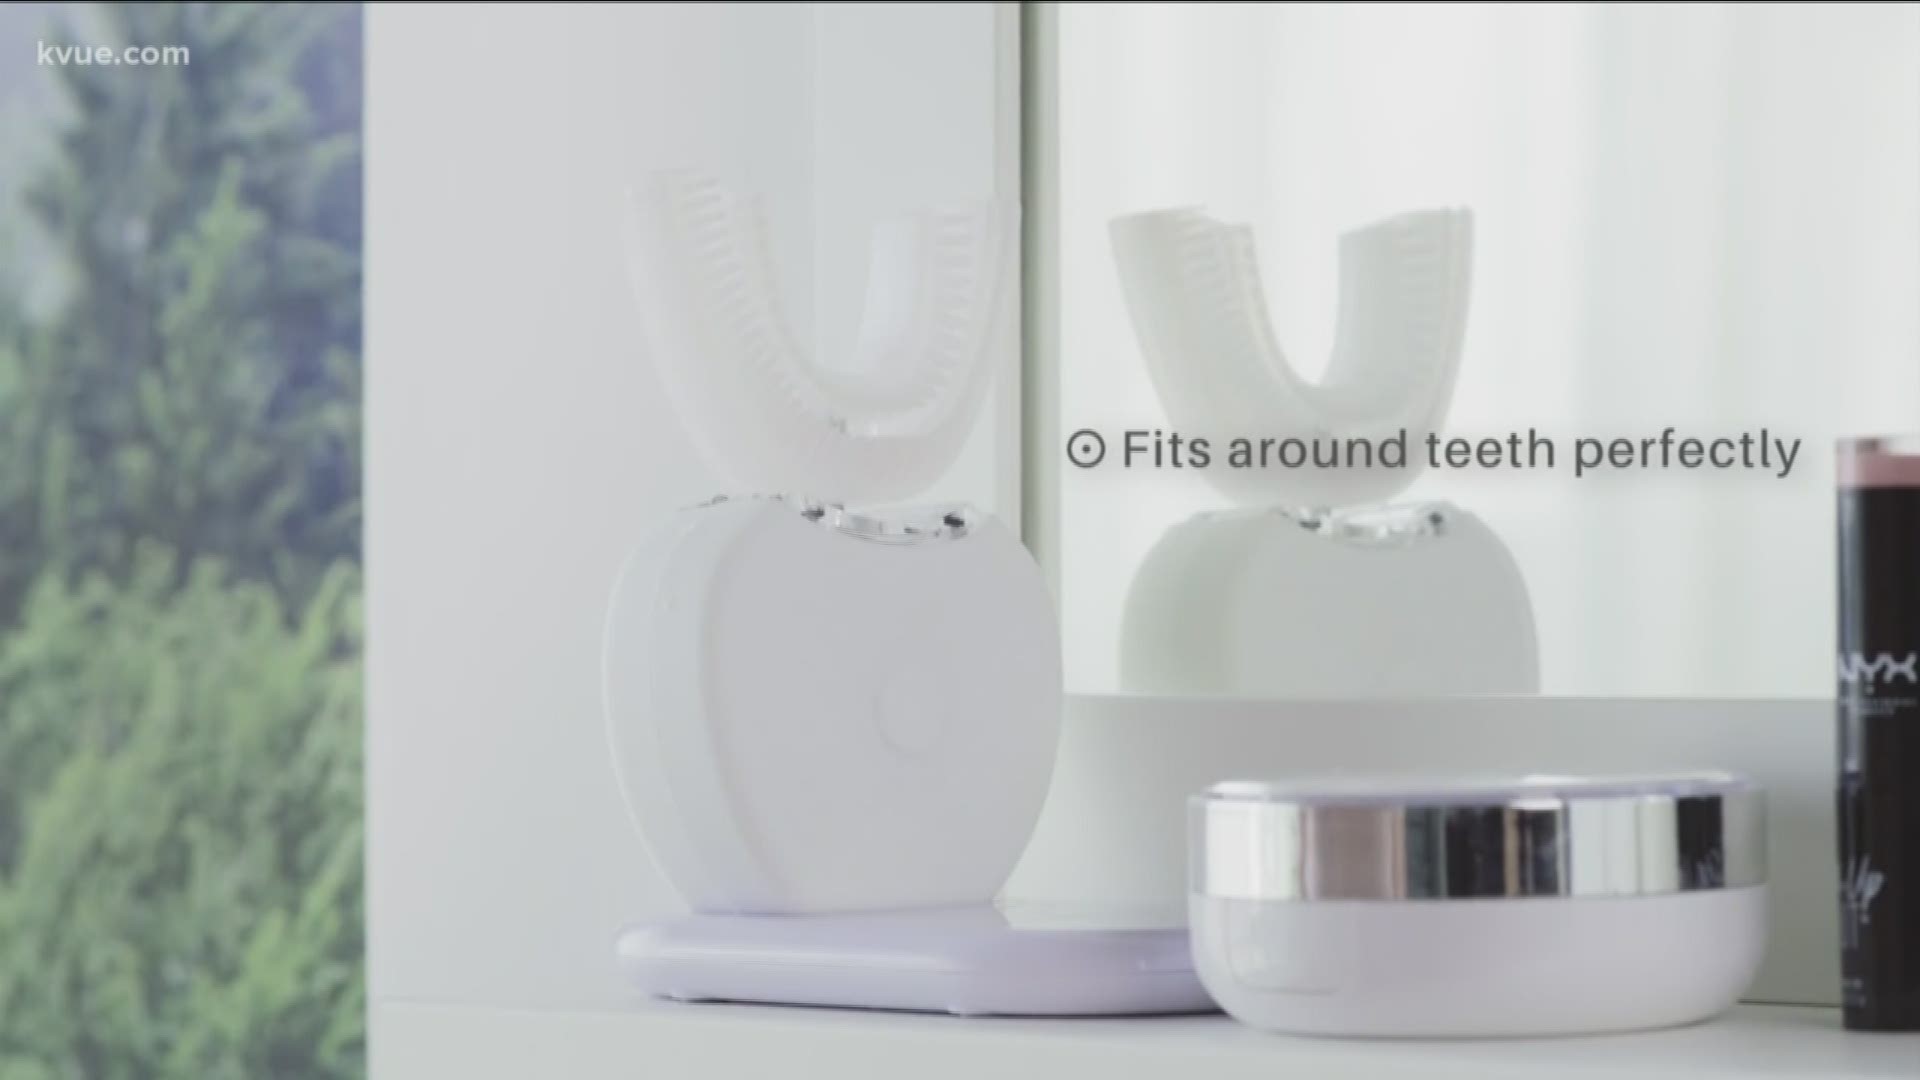 Ever feel like brushing your teeth with a traditional brush takes too long? The V-White automatic brush says it will clean all your teeth at the same time.